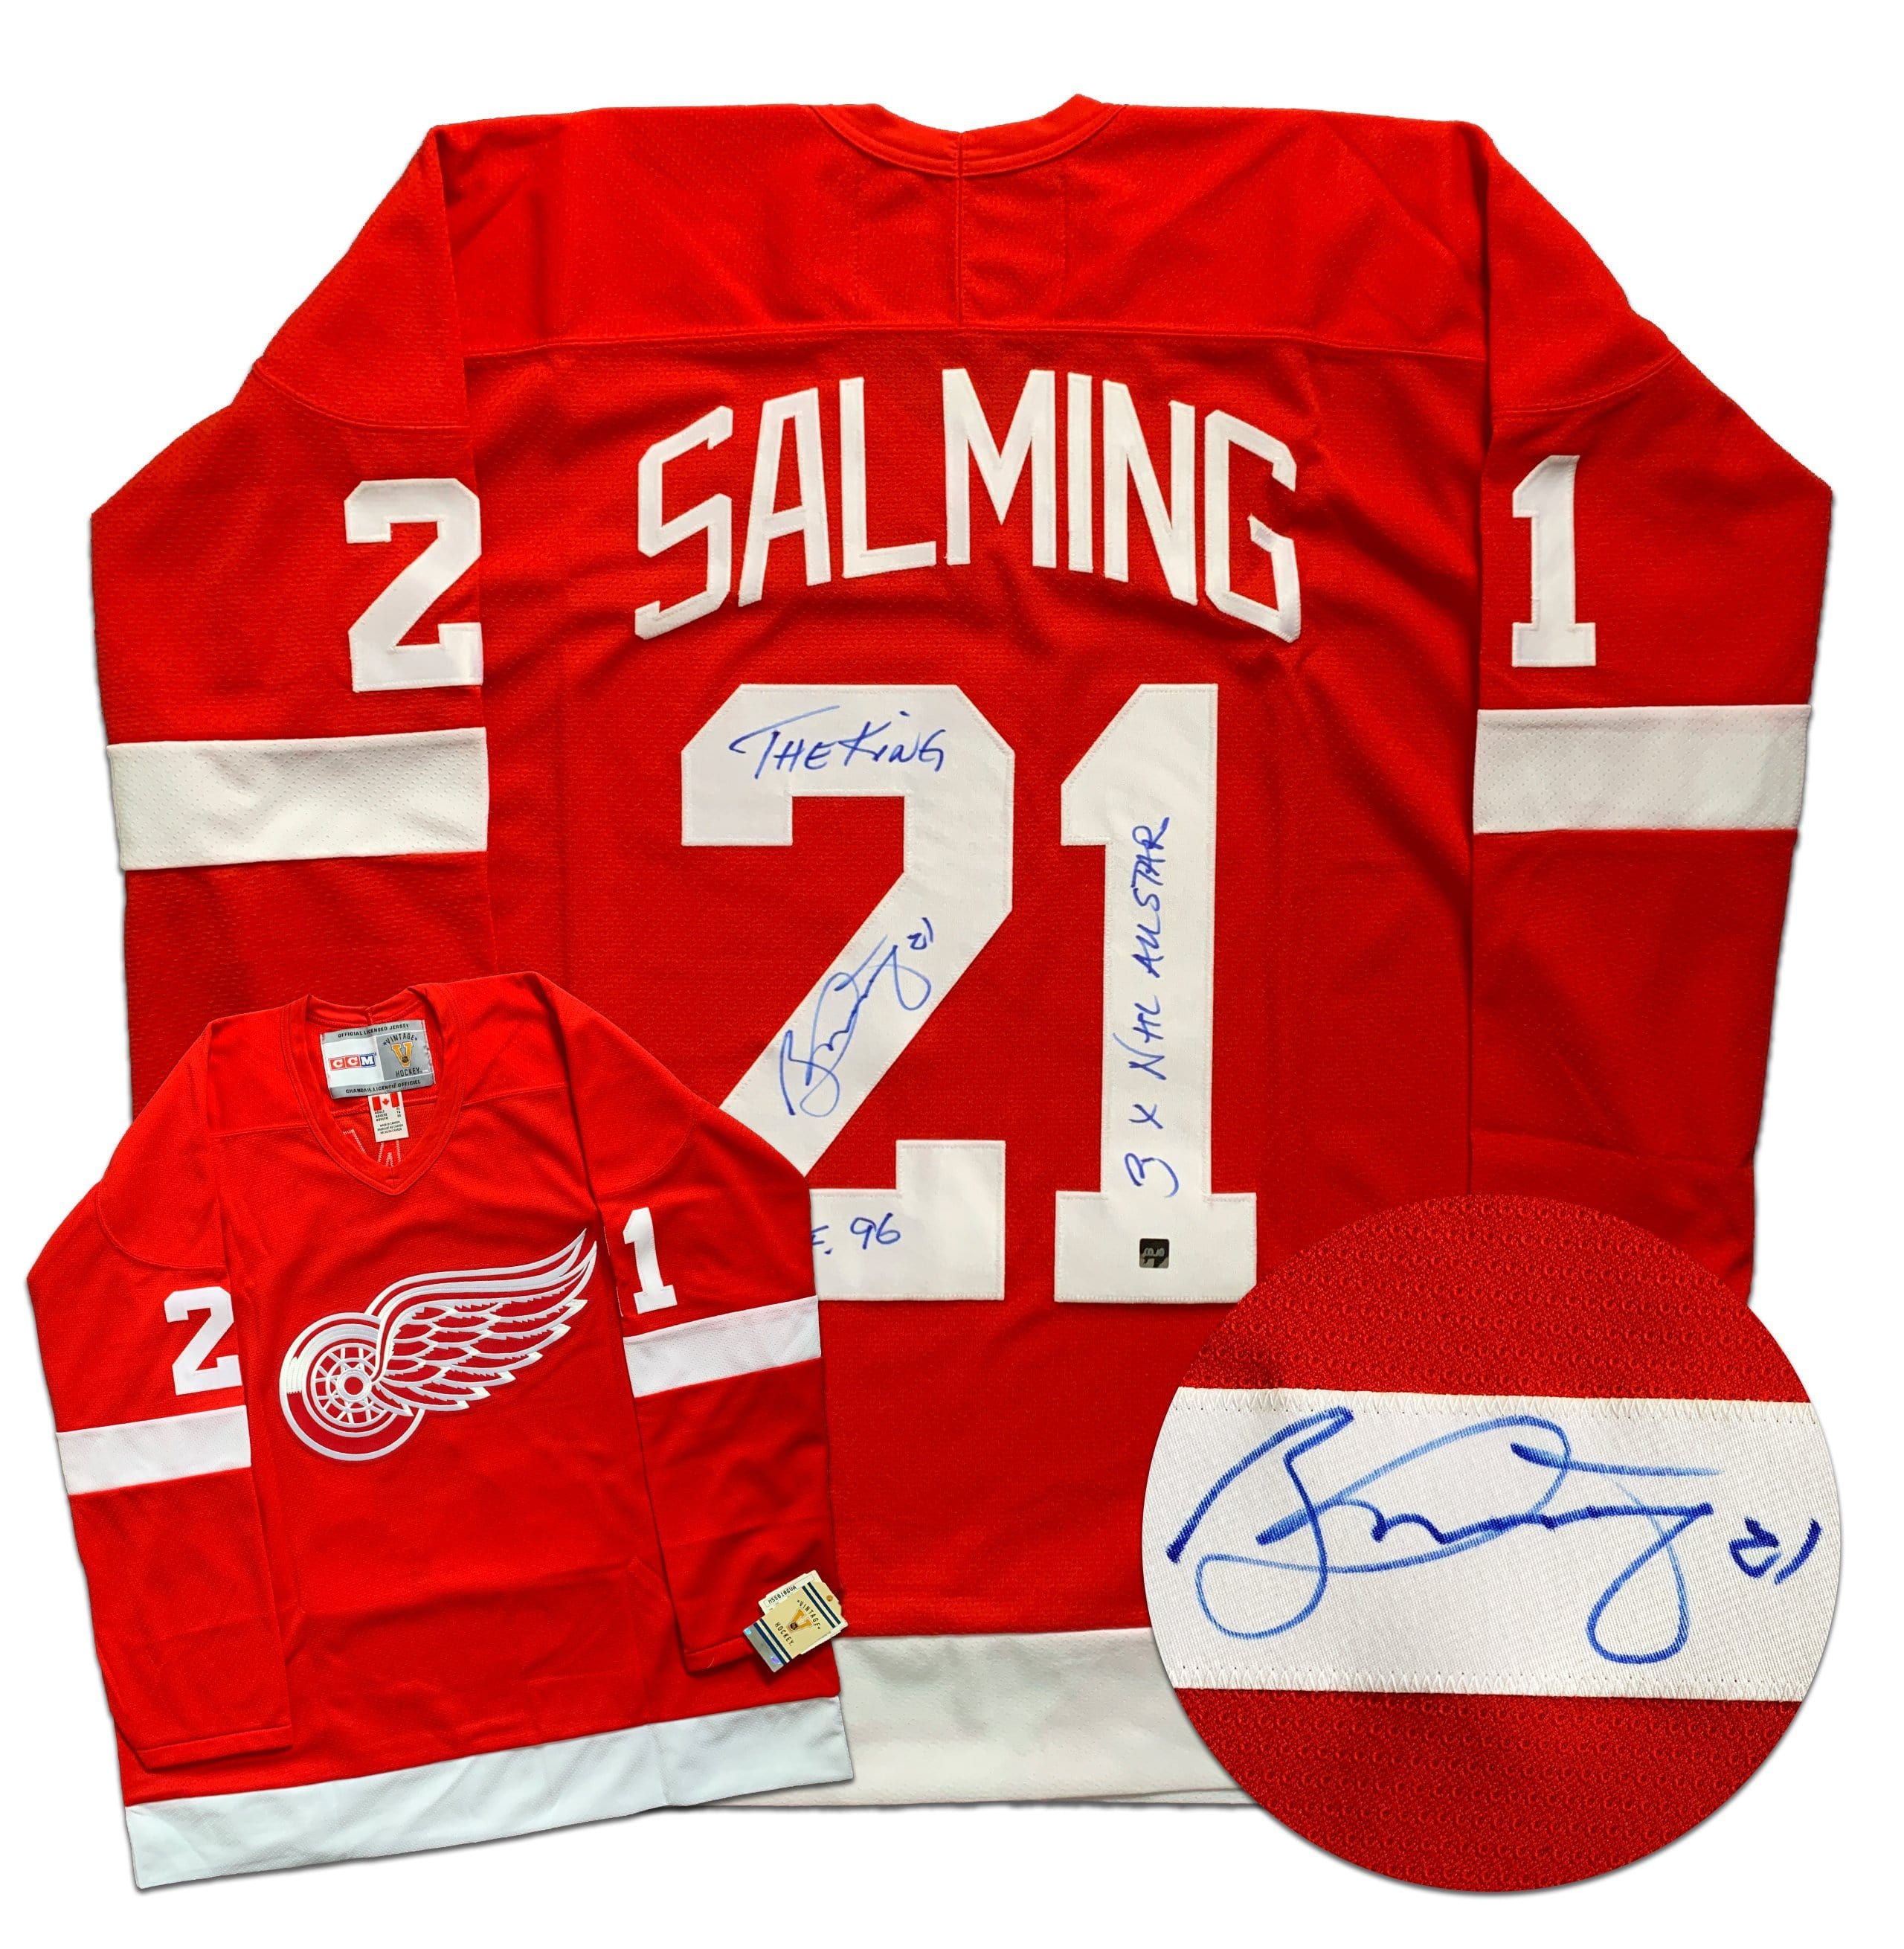 Red-Wings-Signed-Jersey-Framed-by-Jacquez-Art - Jacquez Art & Jersey Framing